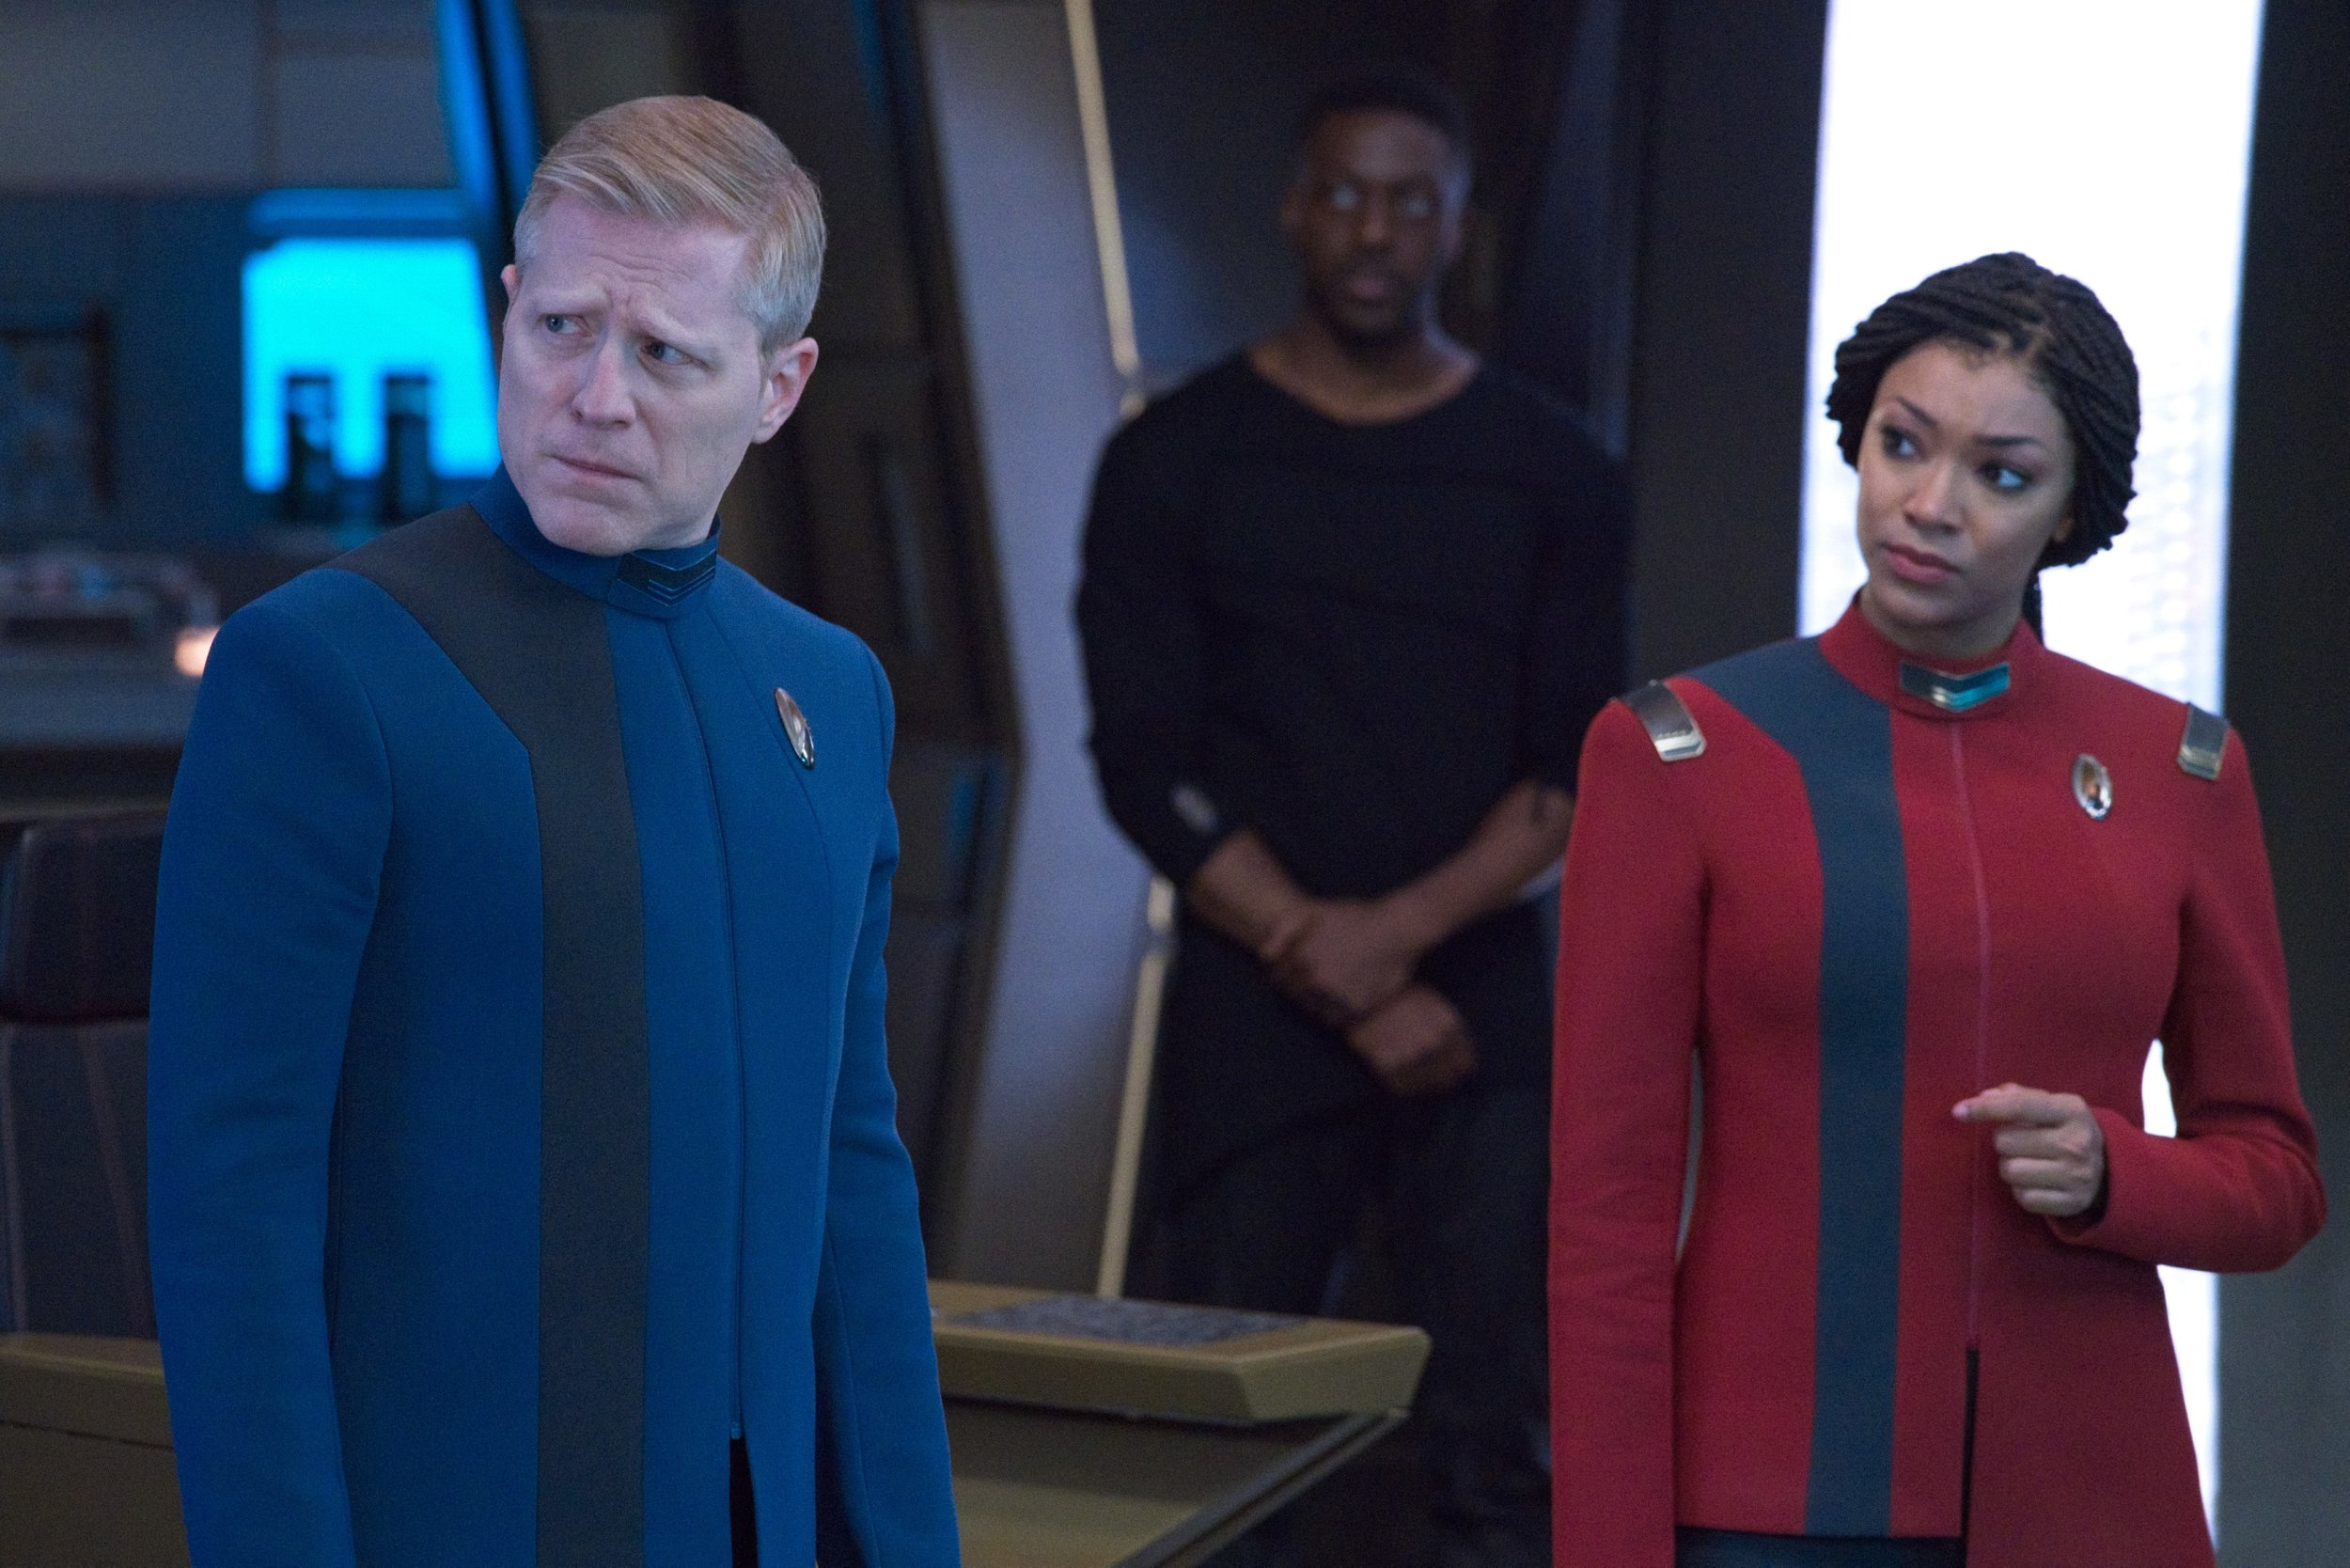   Pictured: Anthony Rapp as Stamets and Sonequa Martin-Green as Burnham of the Paramount+ original series STAR TREK: DISCOVERY. Photo Cr: Michael Gibson/ViacomCBS © 2021 ViacomCBS. All Rights Reserved.  